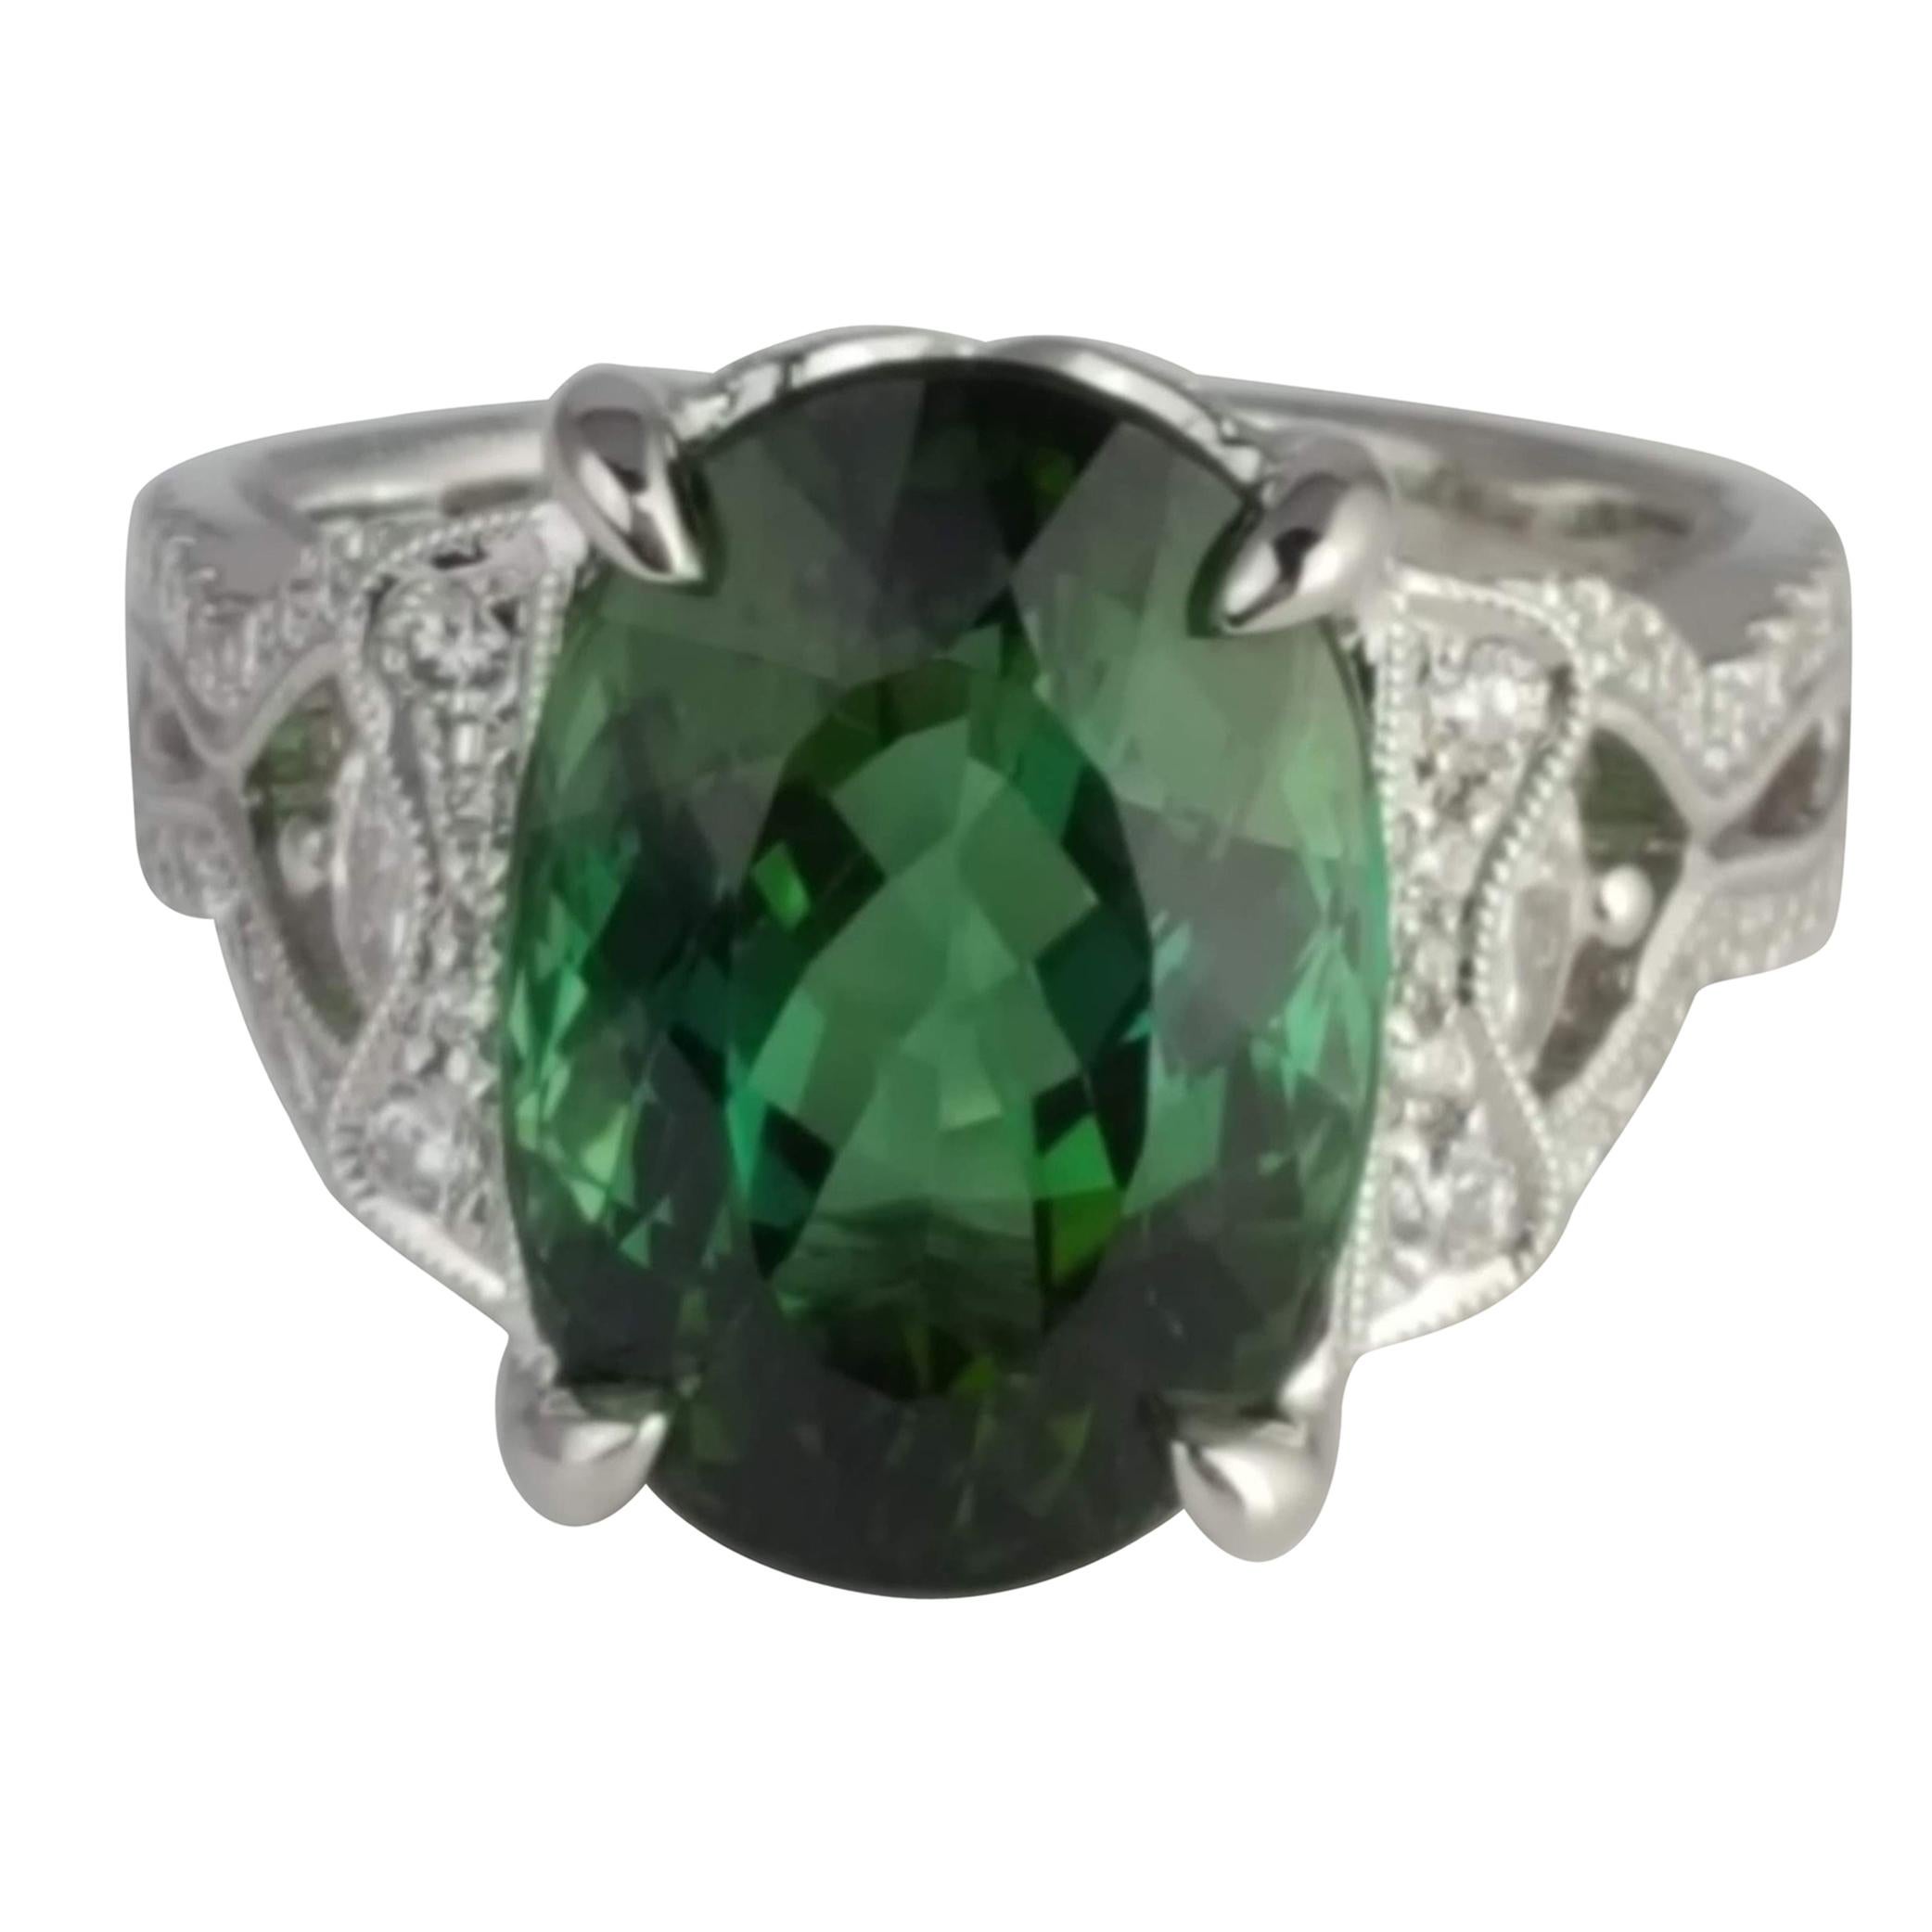 With an 8.54 carat oval cut exotic green Tourmaline center, and a decorated side shank (total diamond weight 0.51 carats), this ring shines from every angle. Intricate hand engraved milgrain work throughout adds to the charm of the piece.

Center: